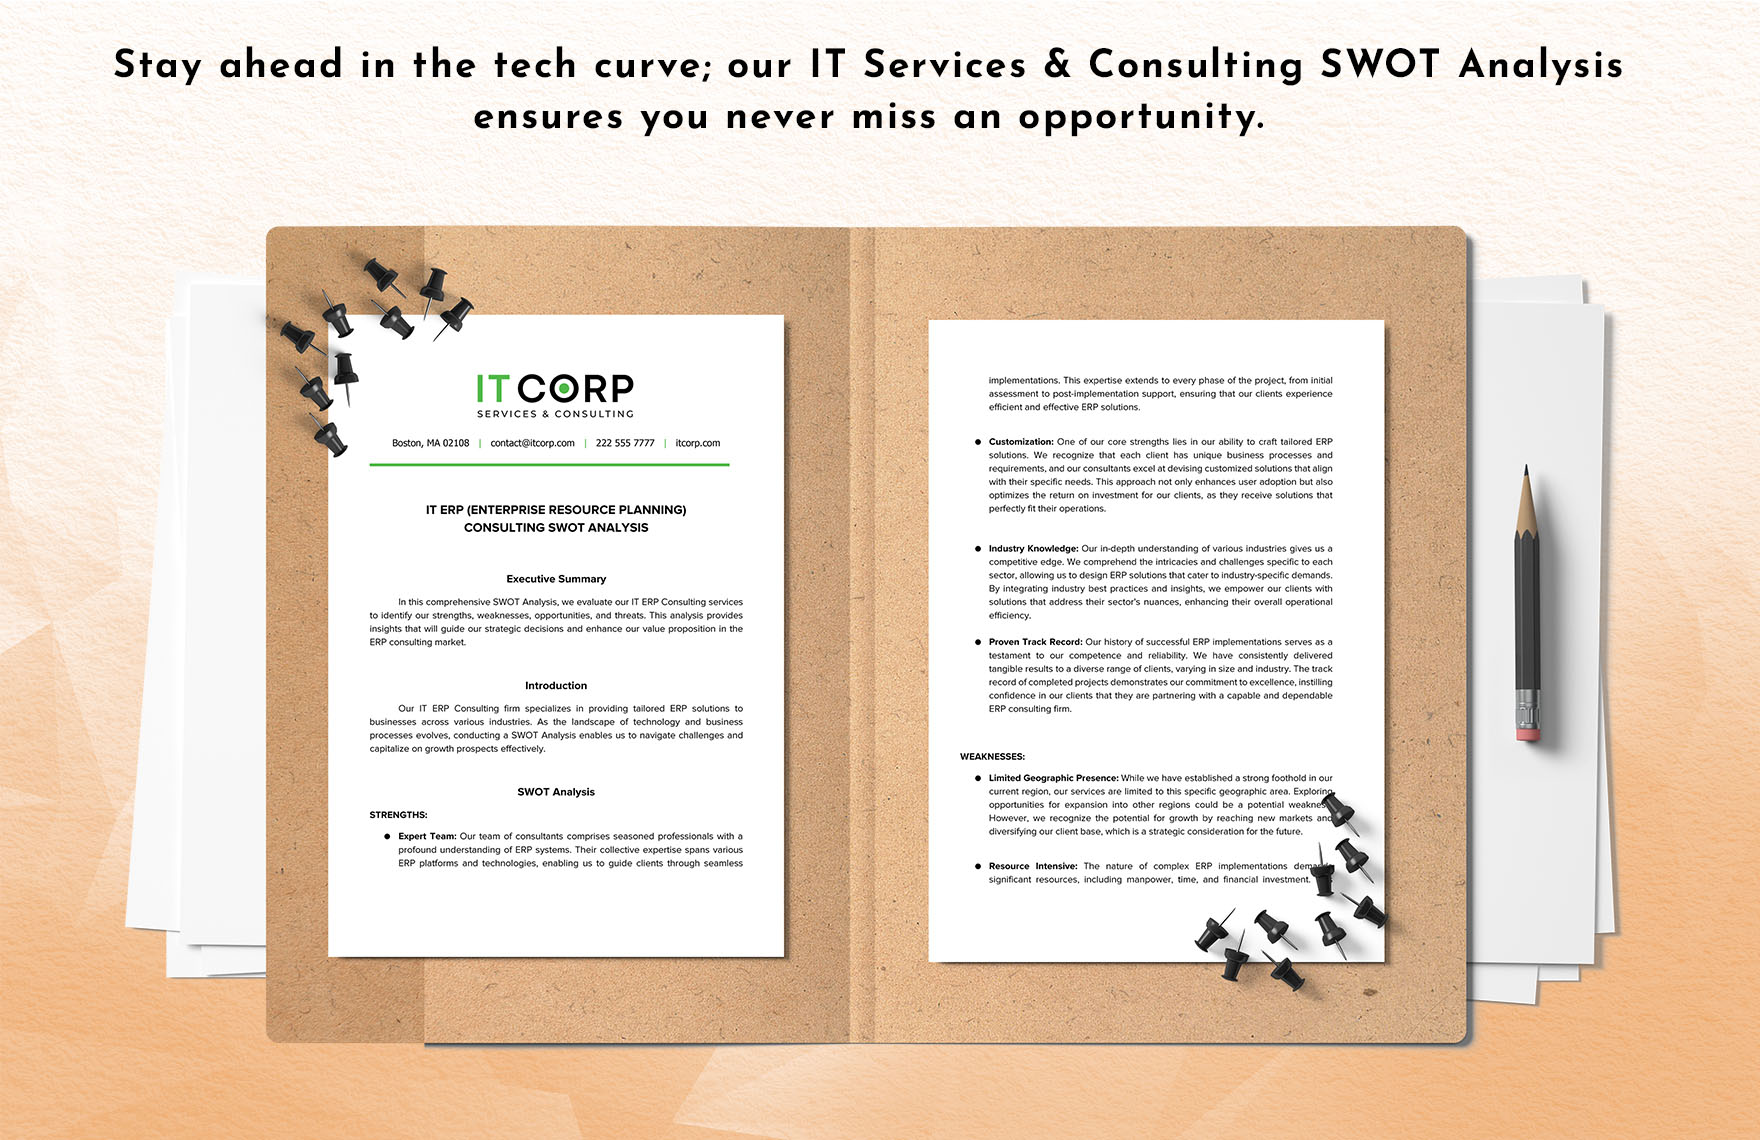 IT ERP (Enterprise Resource Planning) Consulting SWOT Analysis Template